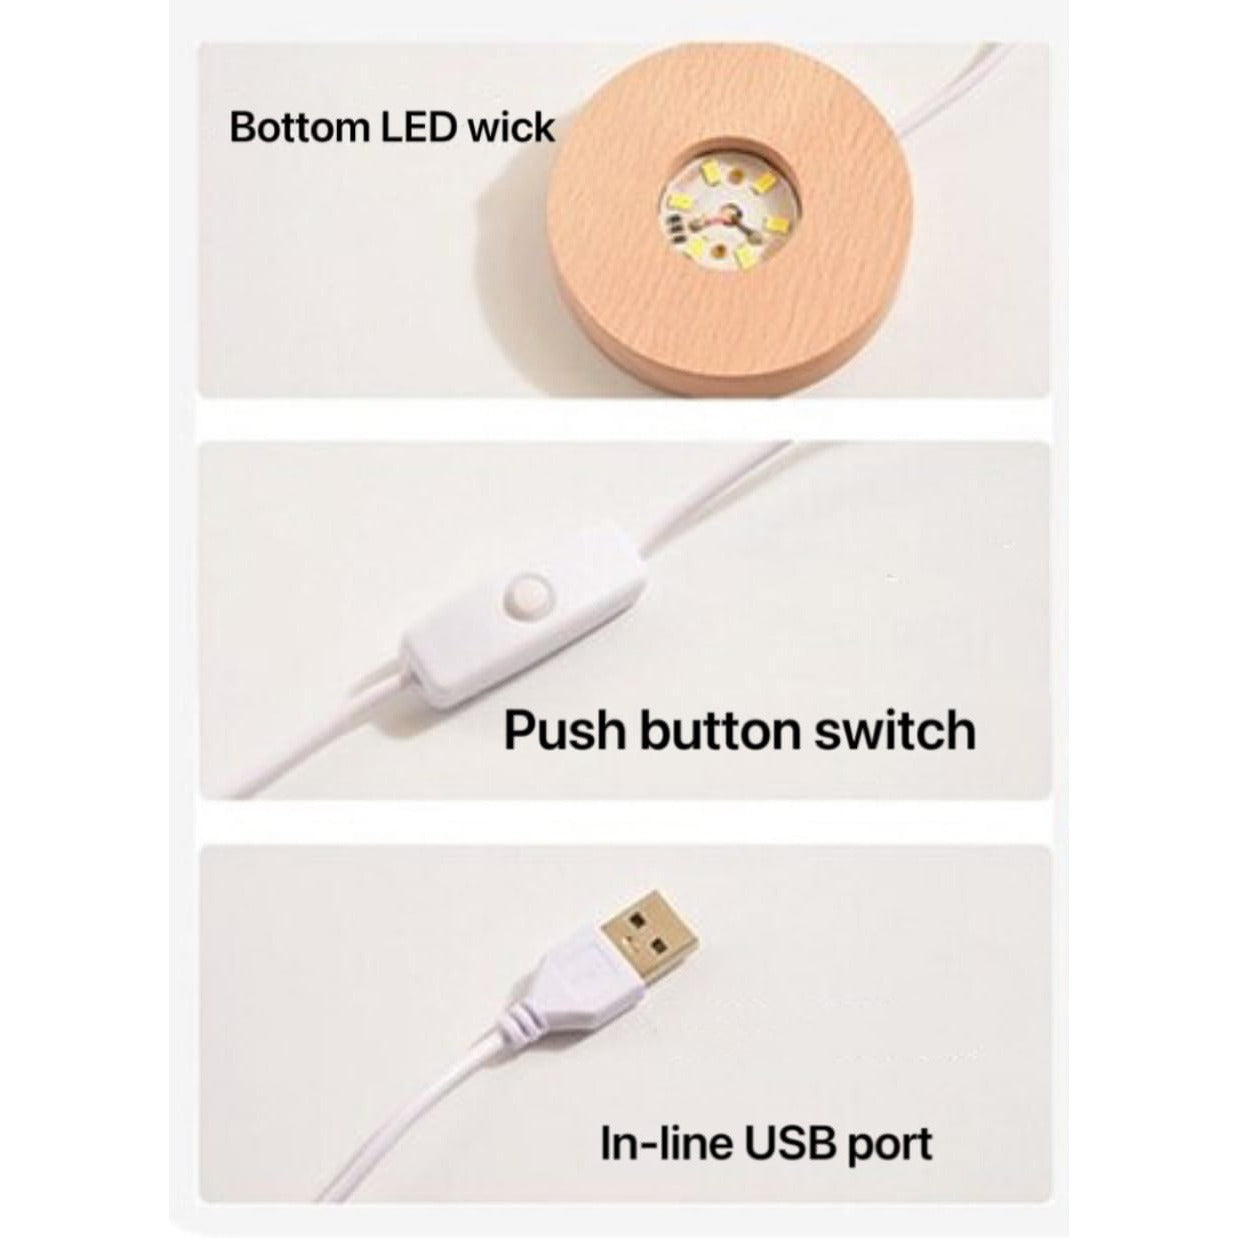 Parts of Crystal Ball LED Night Light.